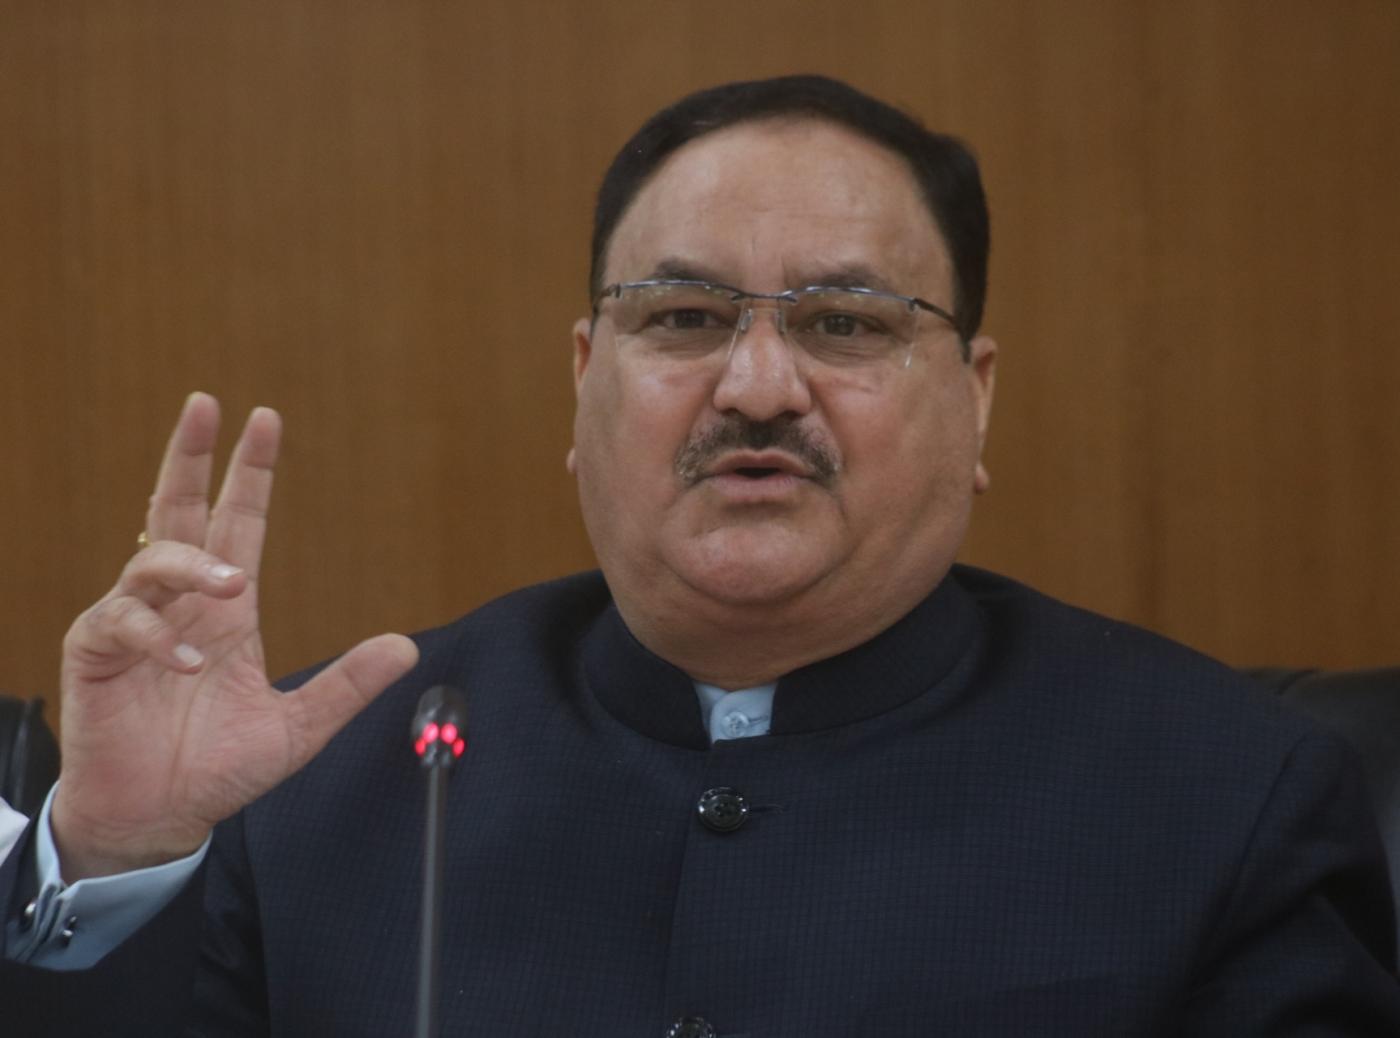 New Delhi: Union Minister for Health and Family Welfare J.P. Nadda addresses a press conference in New Delhi on Feb 2, 2018. (Photo: IANS) by .